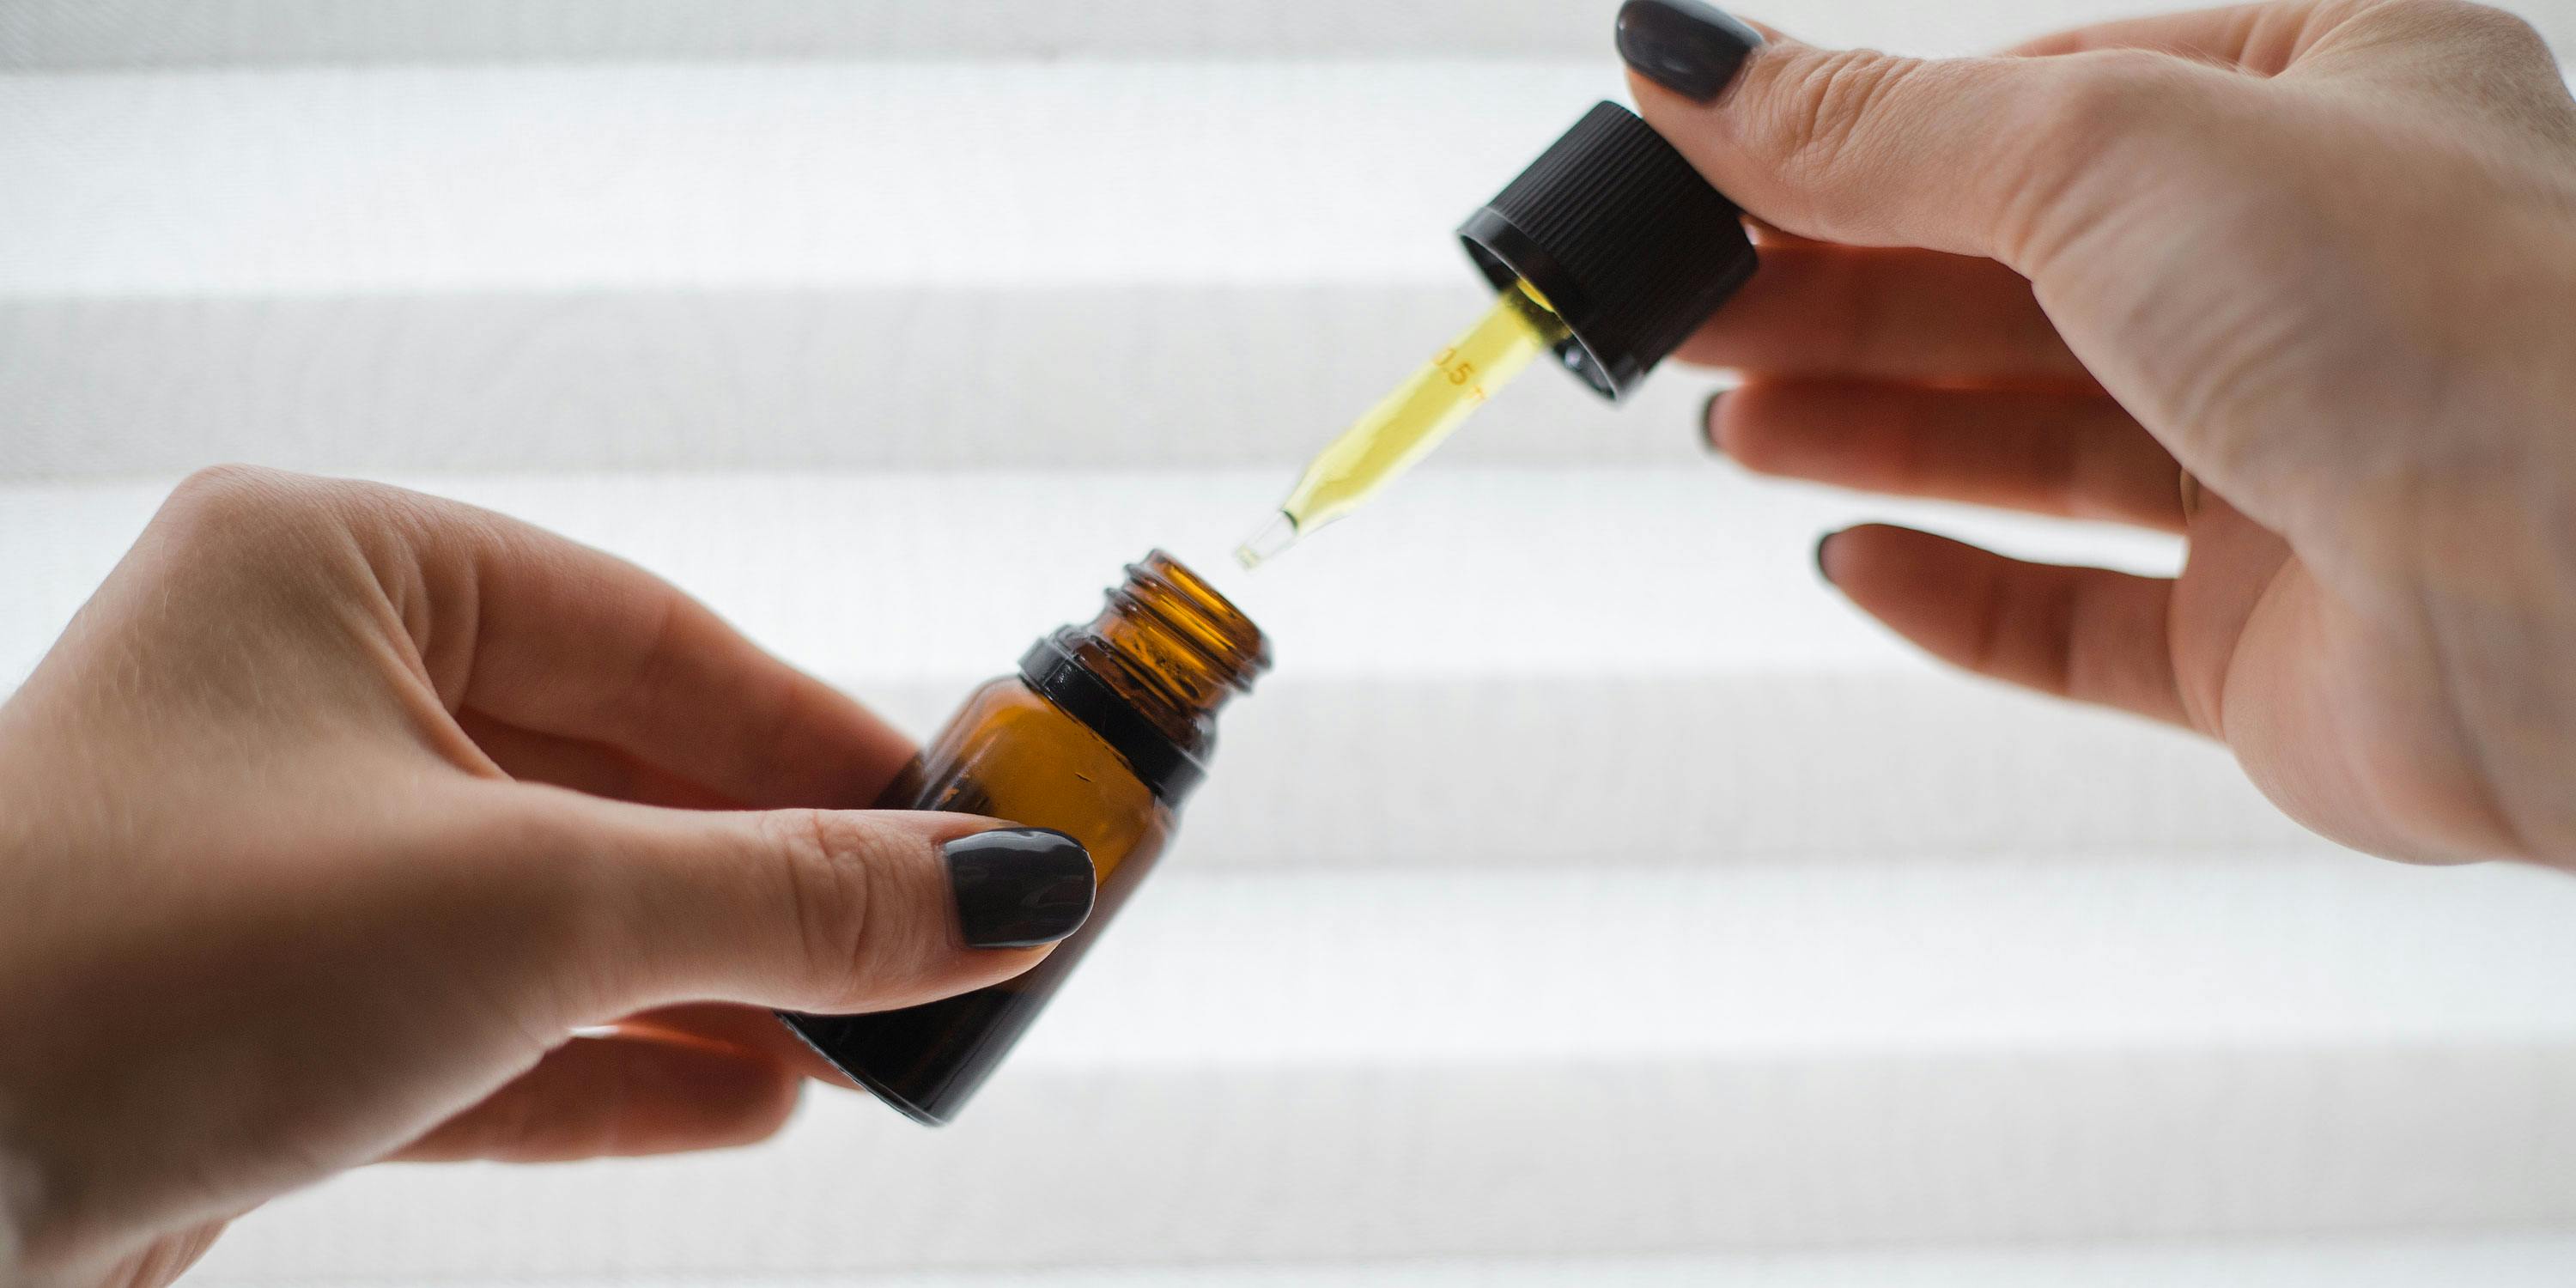 5 Underrated Uses for CBD You Probably Don’t Know About